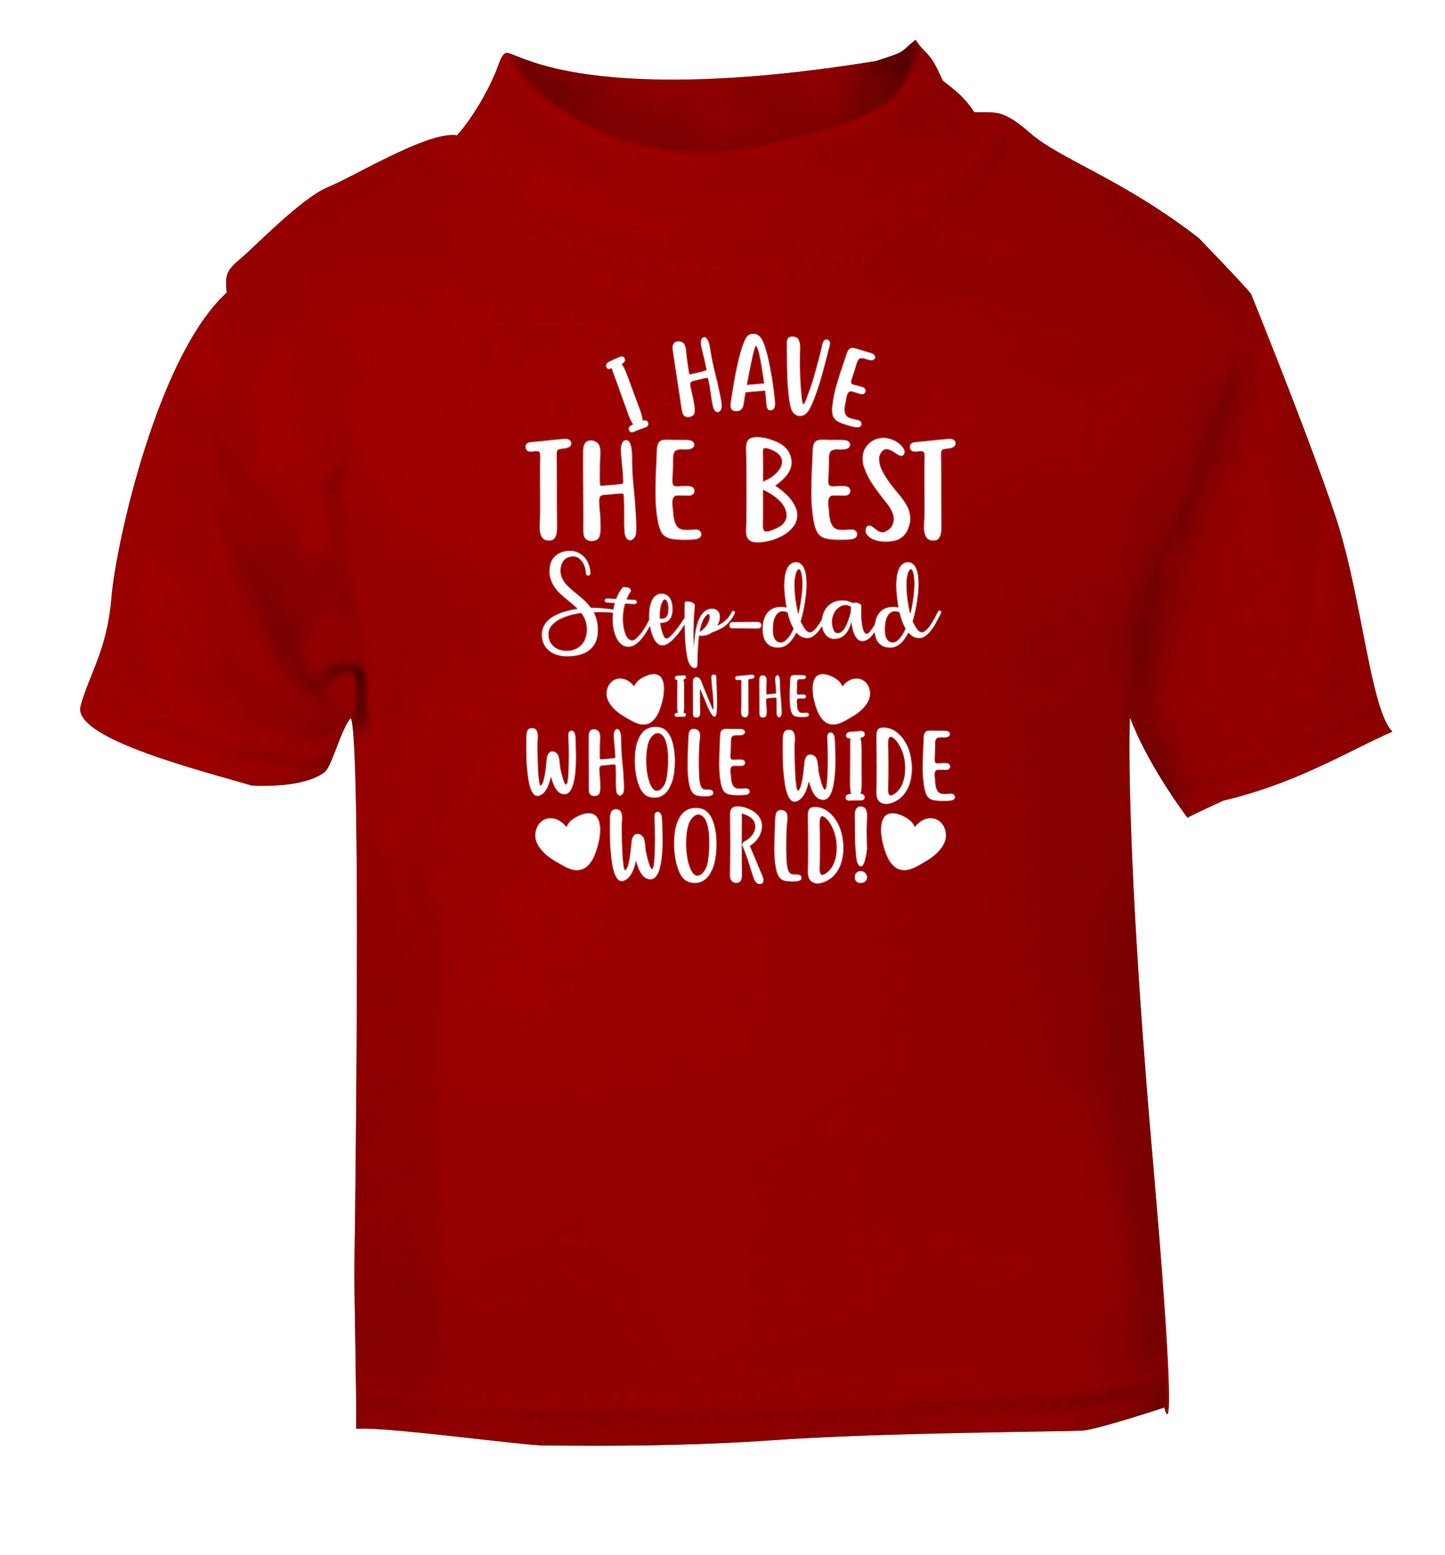 I have the best step-dad in the whole wide world! red Baby Toddler Tshirt 2 Years